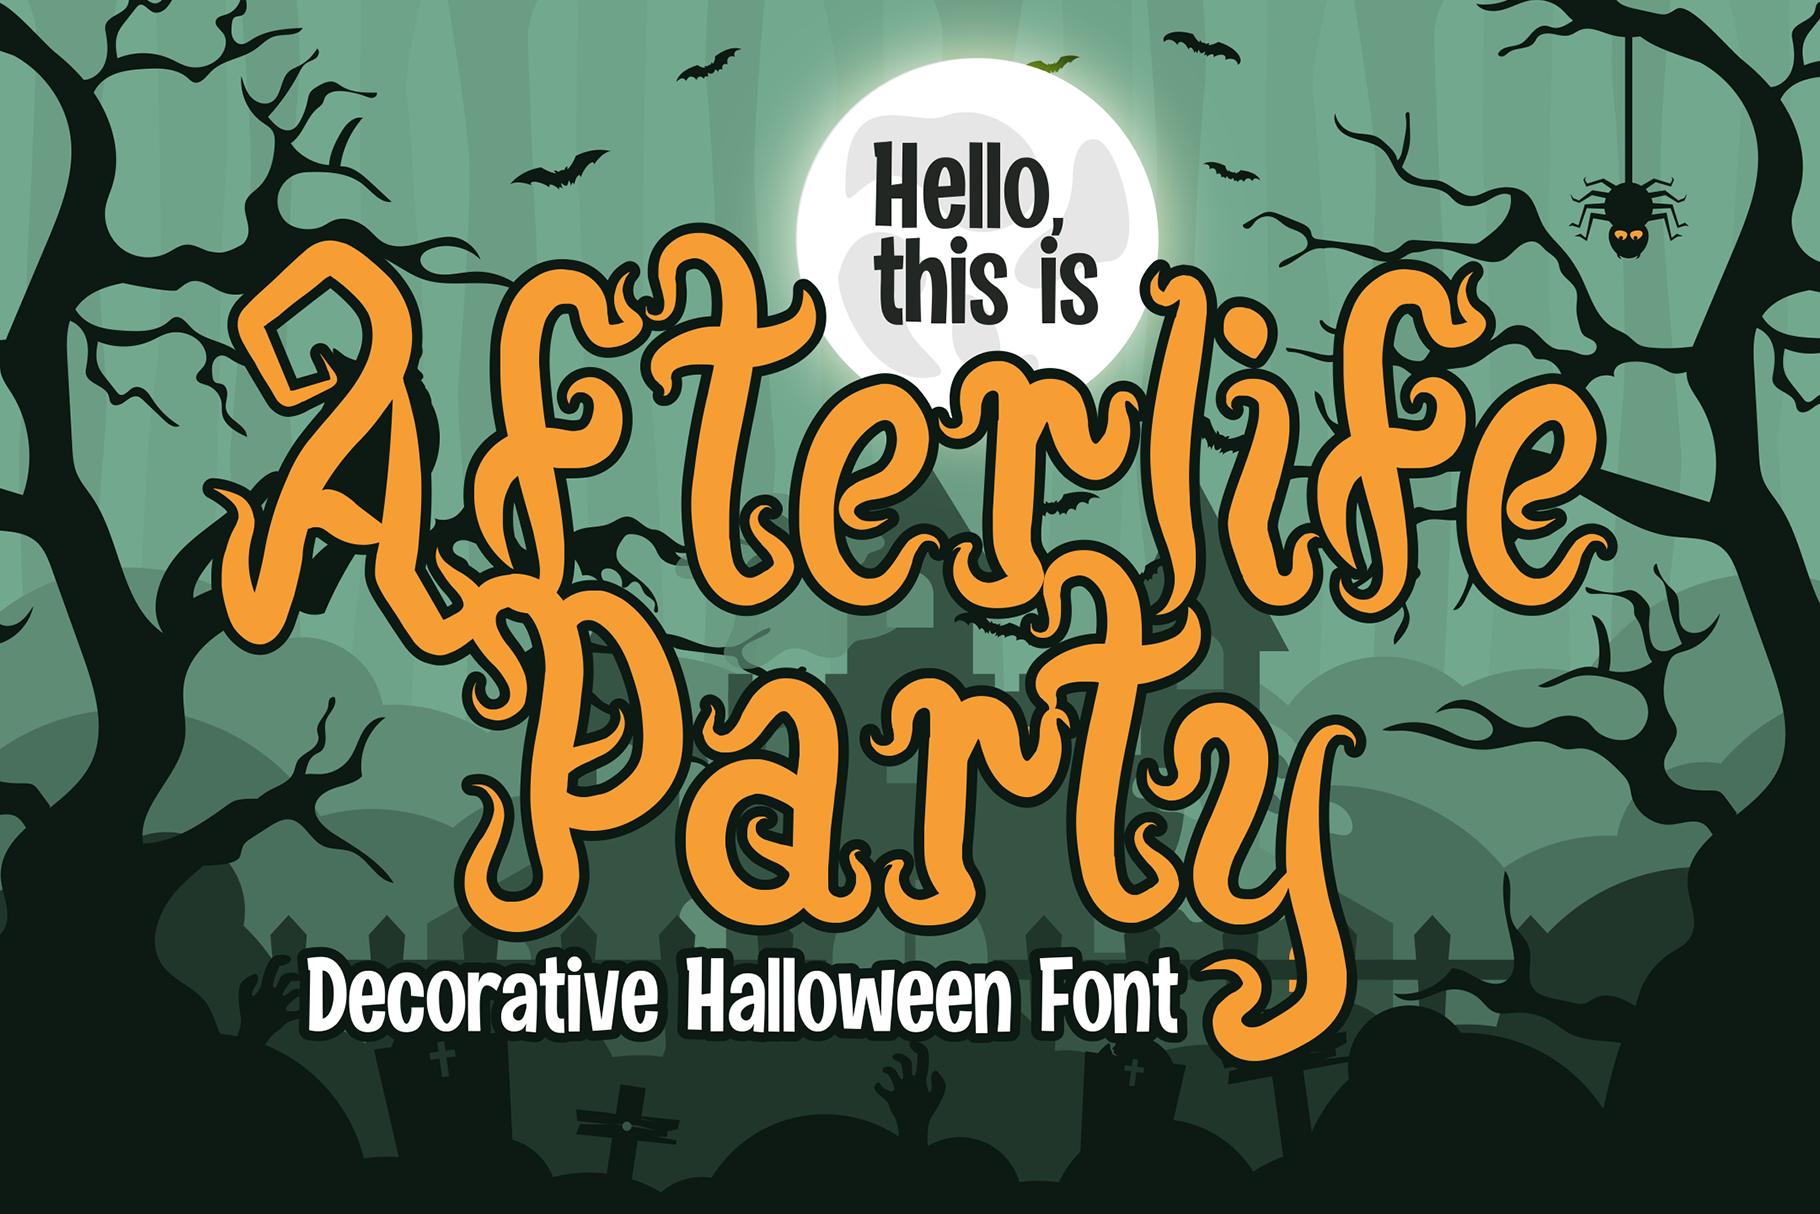 Afterlife Party Font